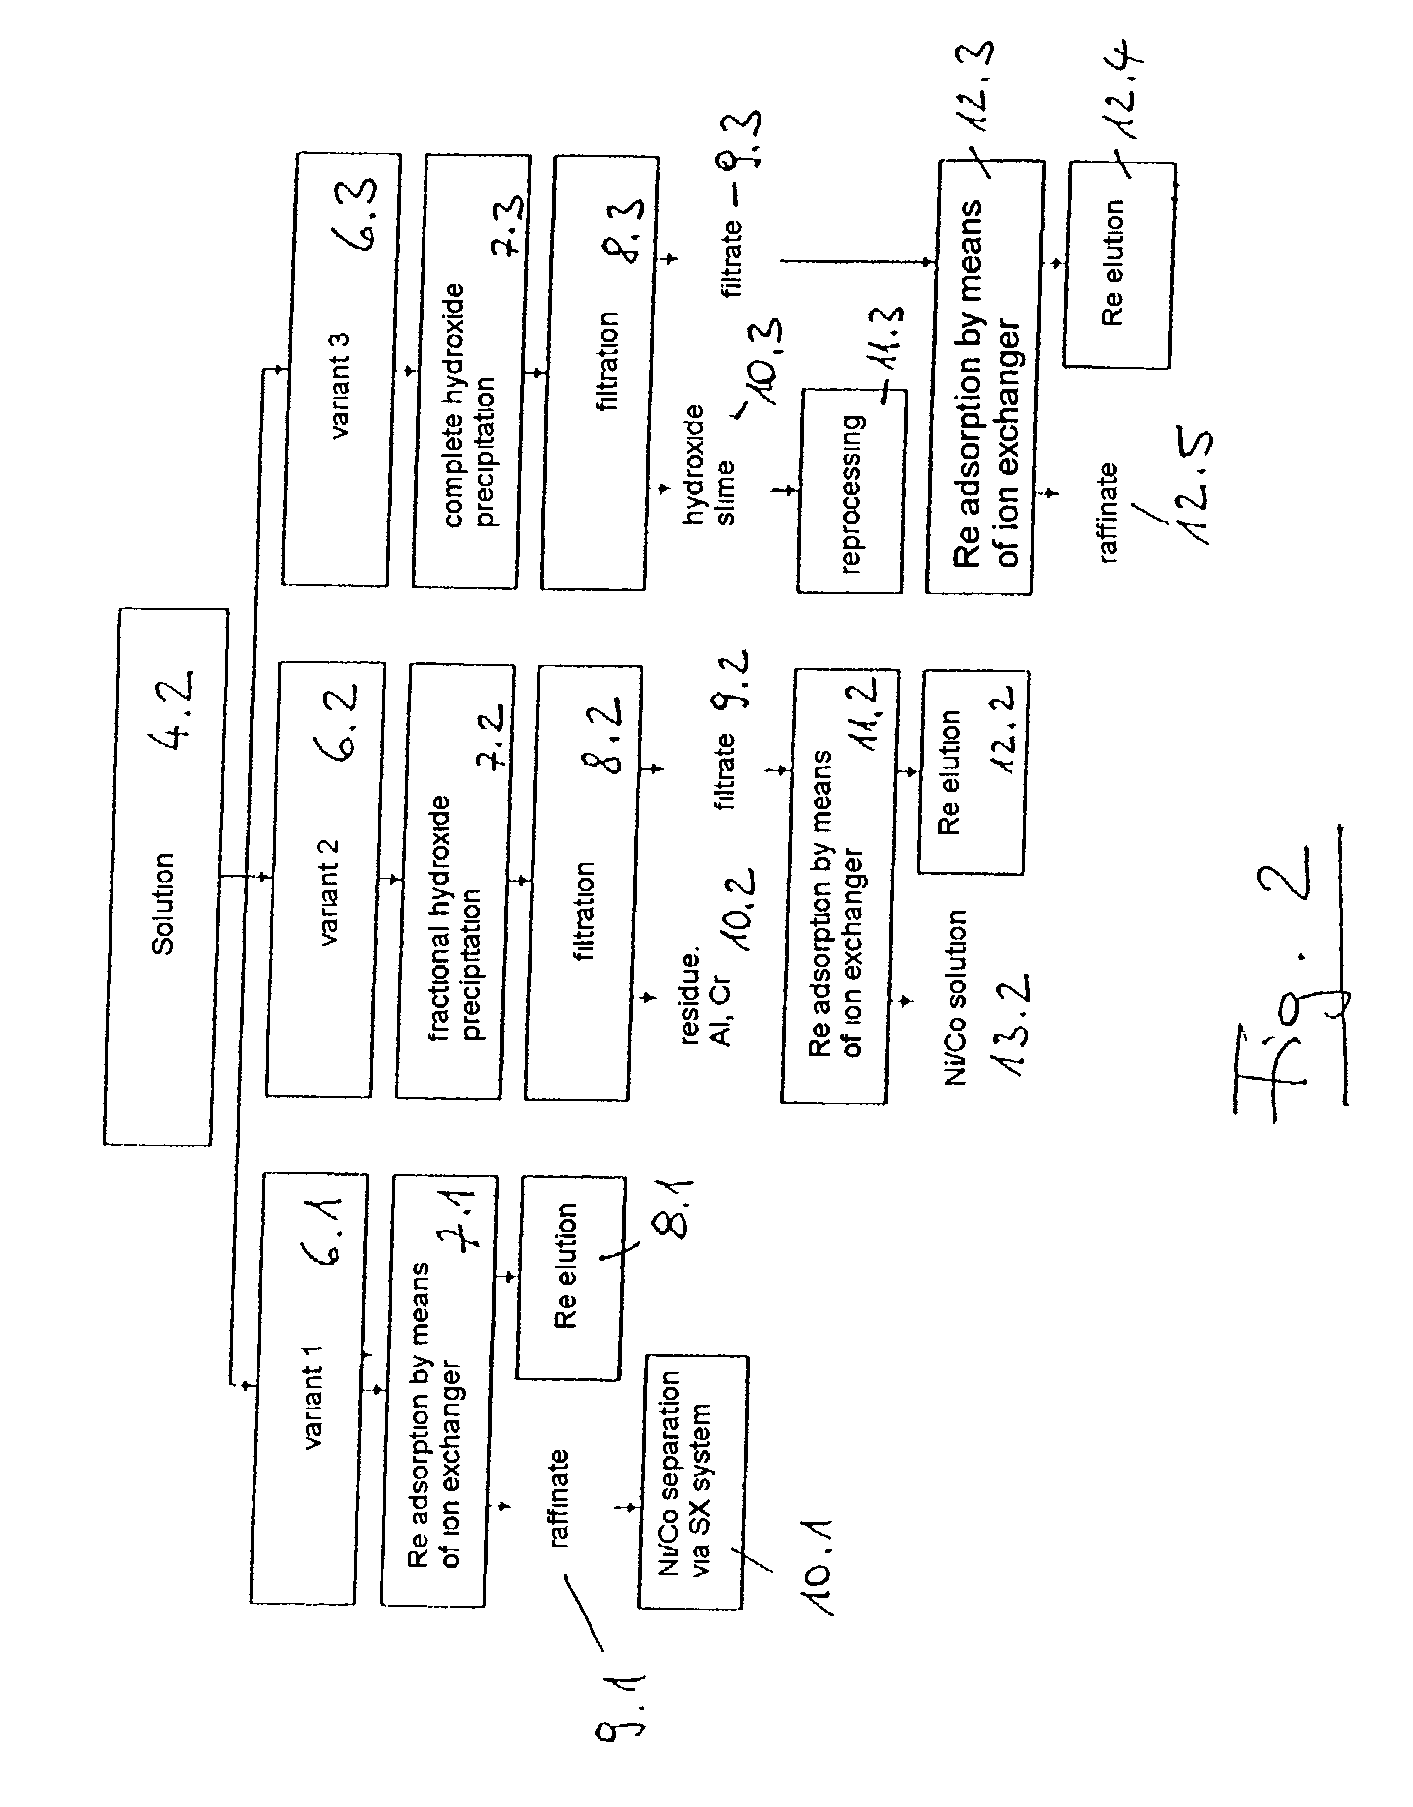 Process for electrochemical decomposition of superalloys